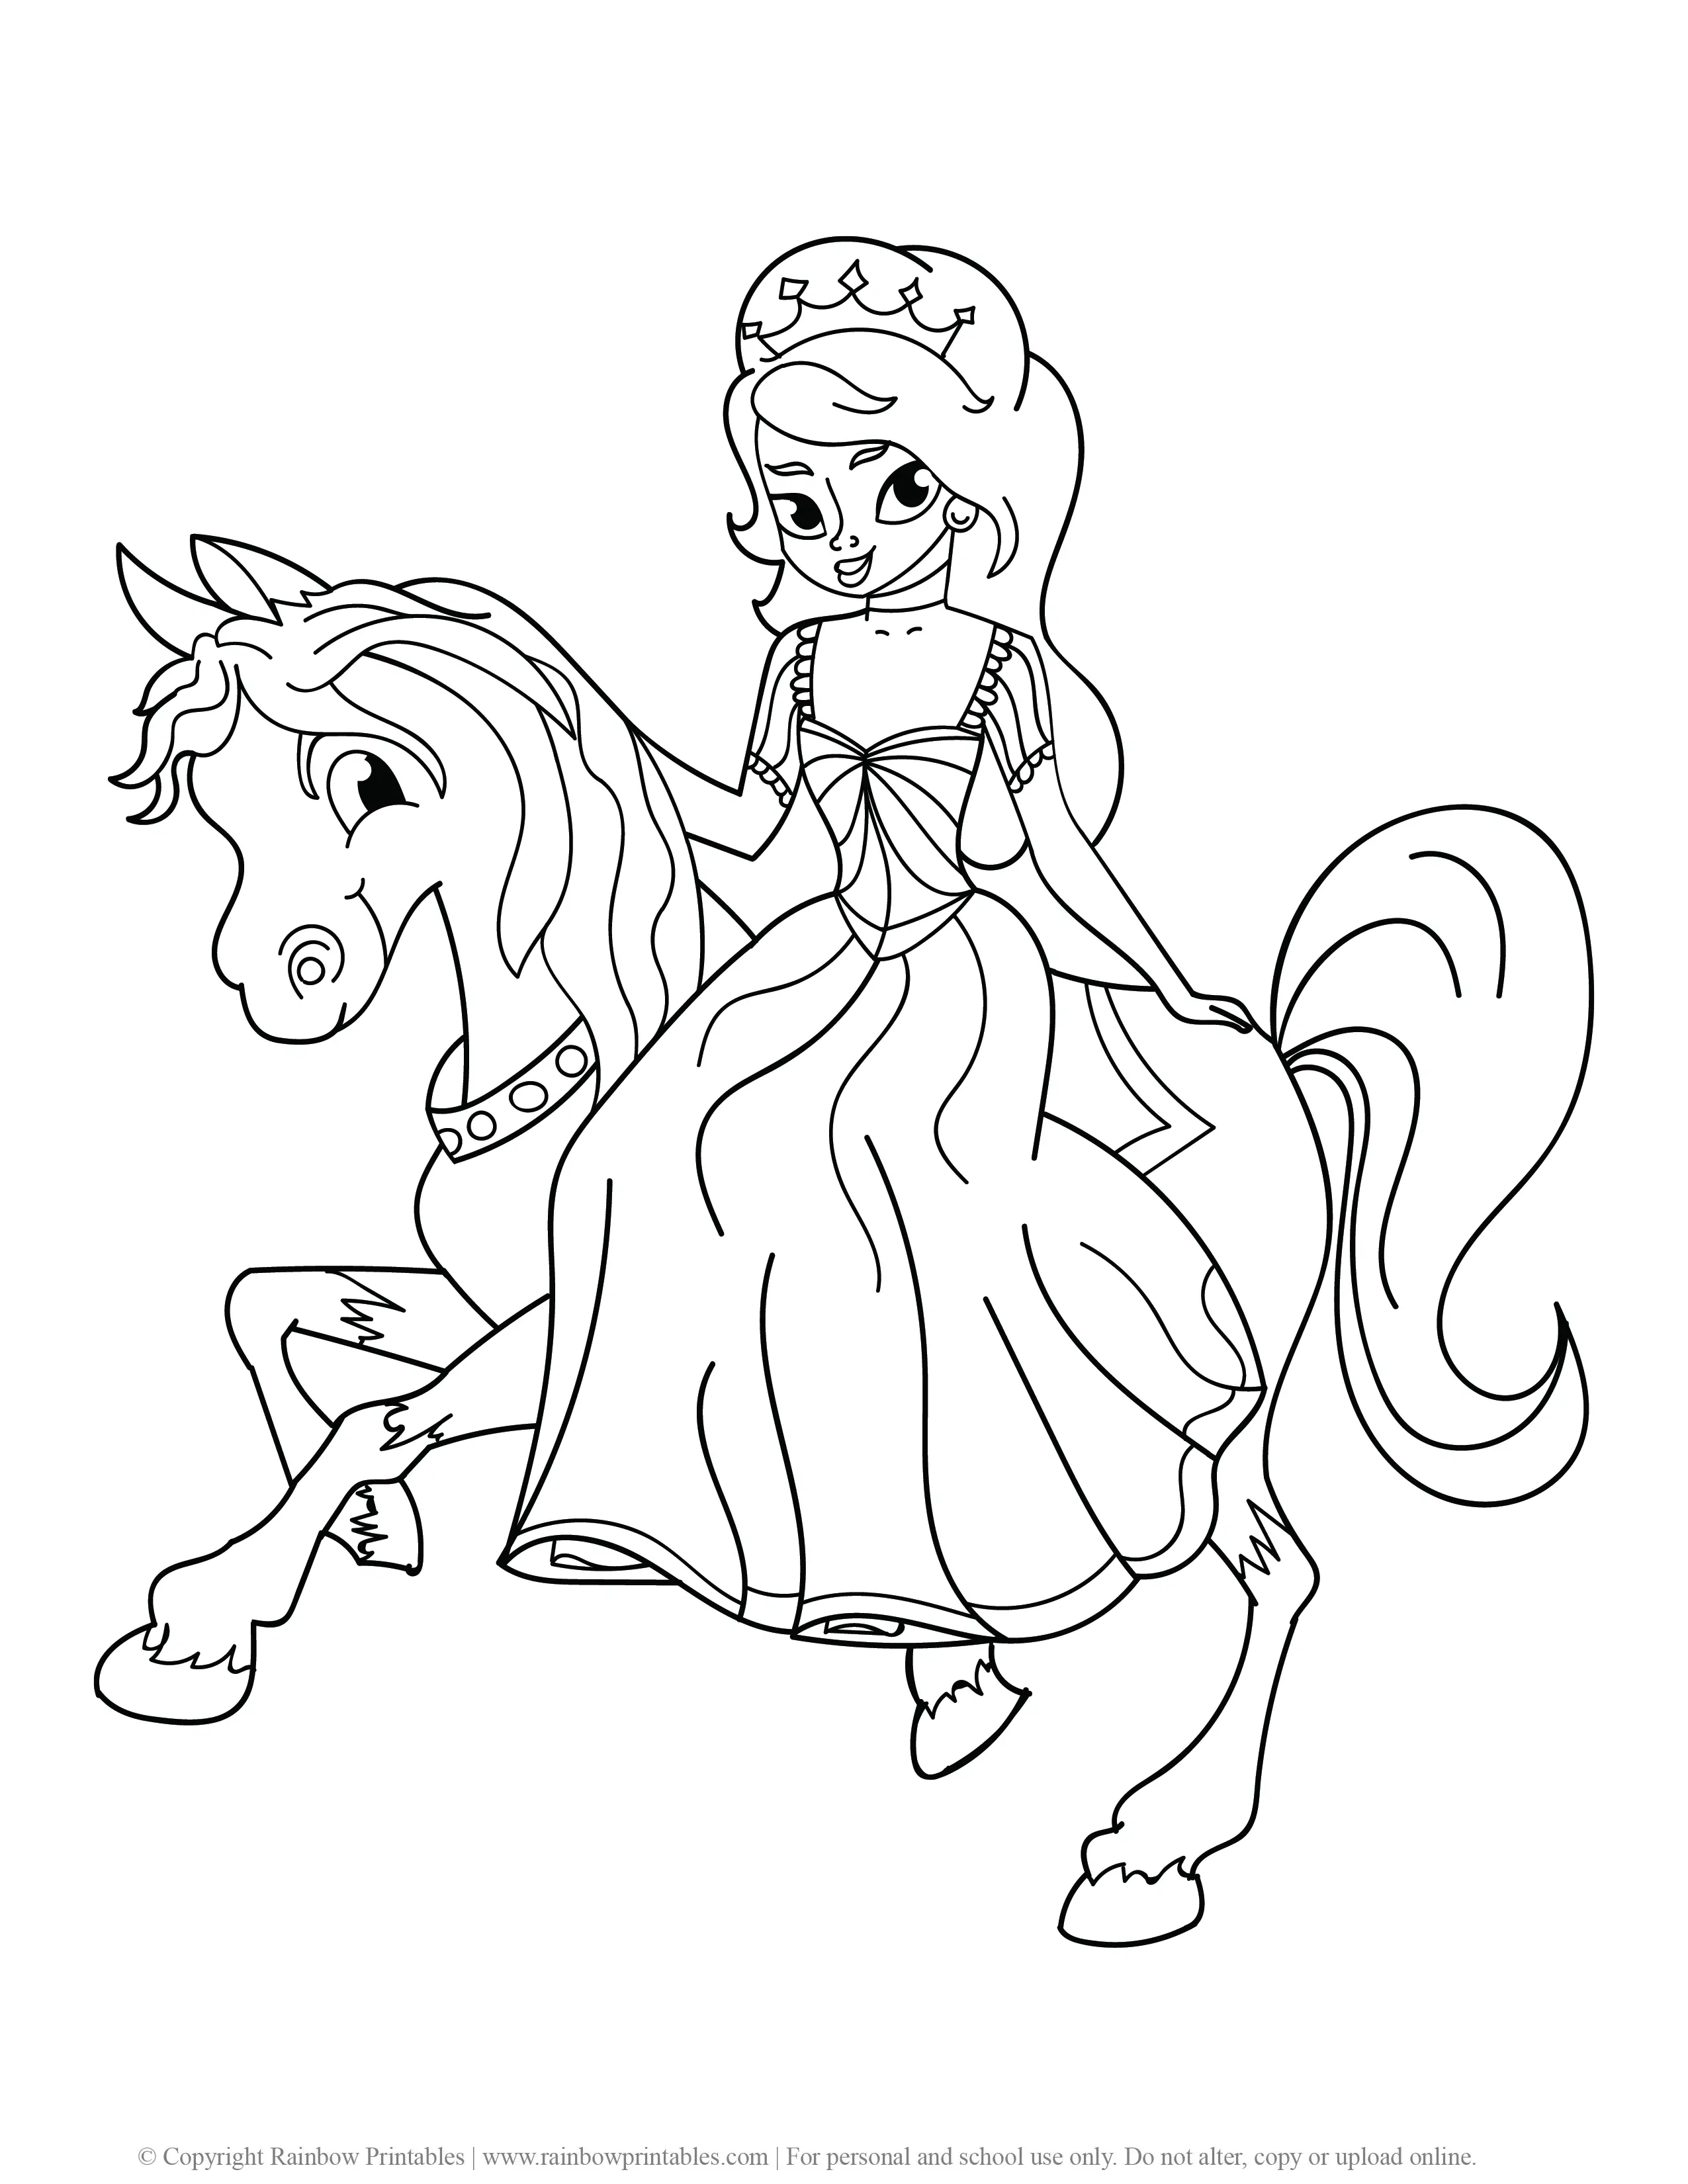 Cute Princess Coloring Pages for Girls   Rainbow Printables